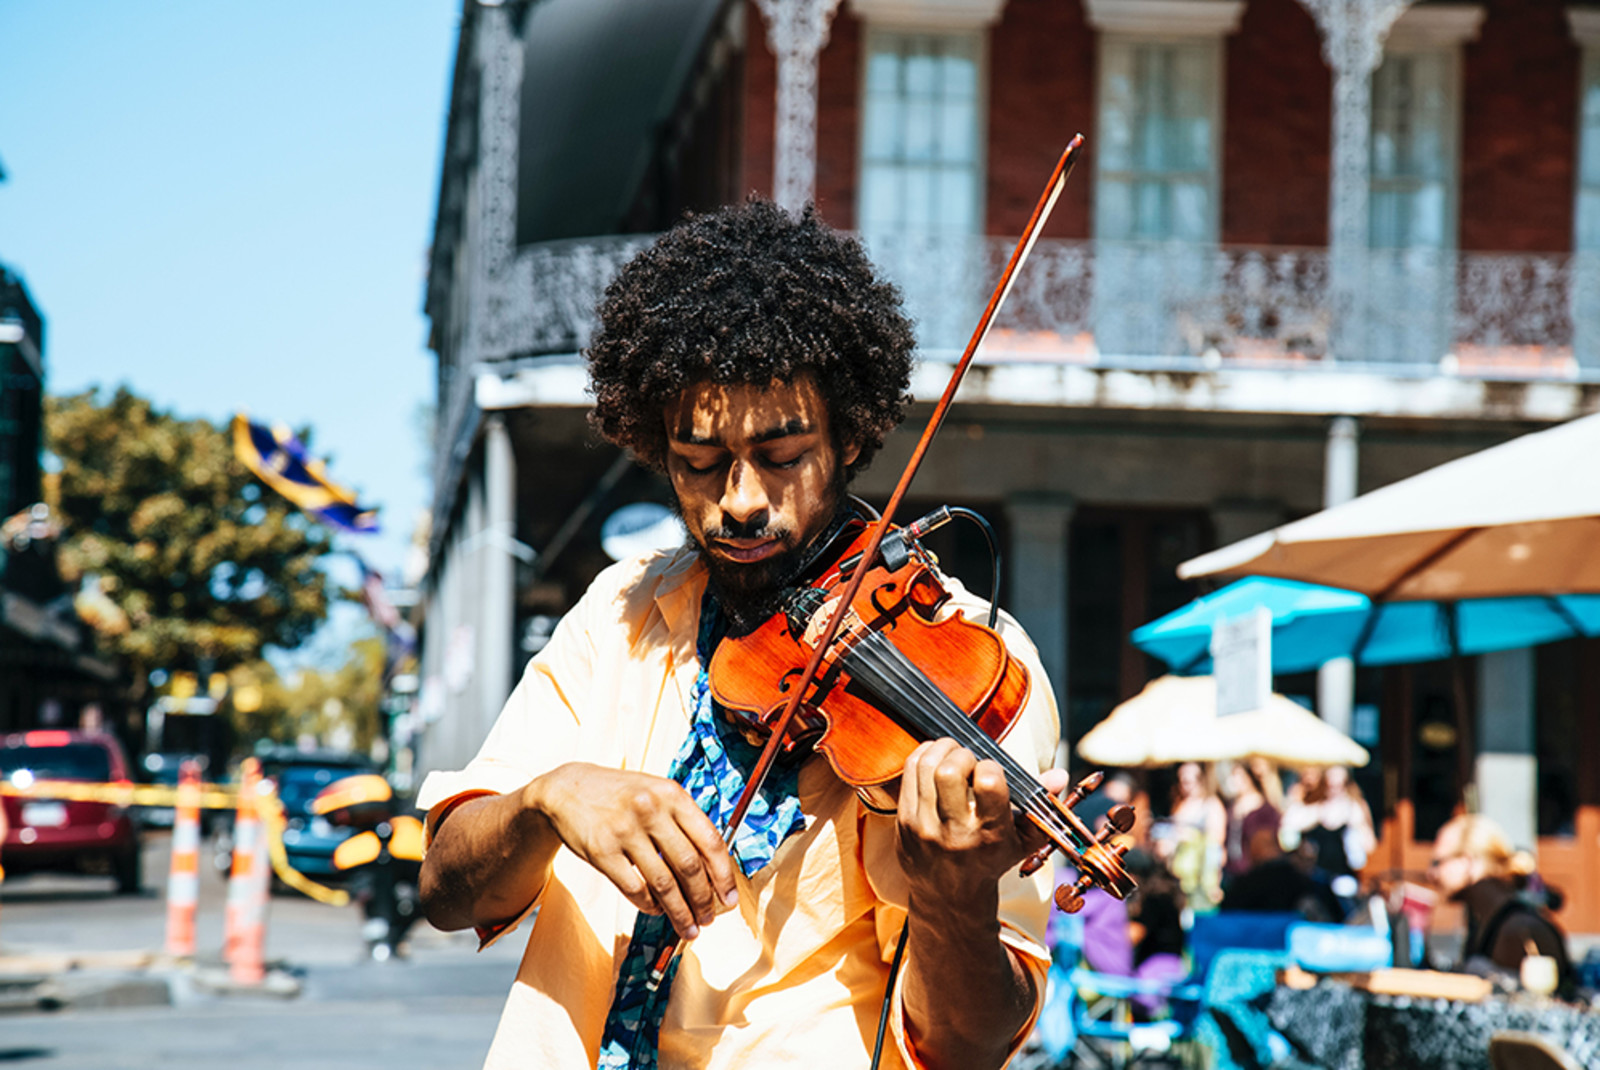 street performer playing the violin in new orleans louisiana 